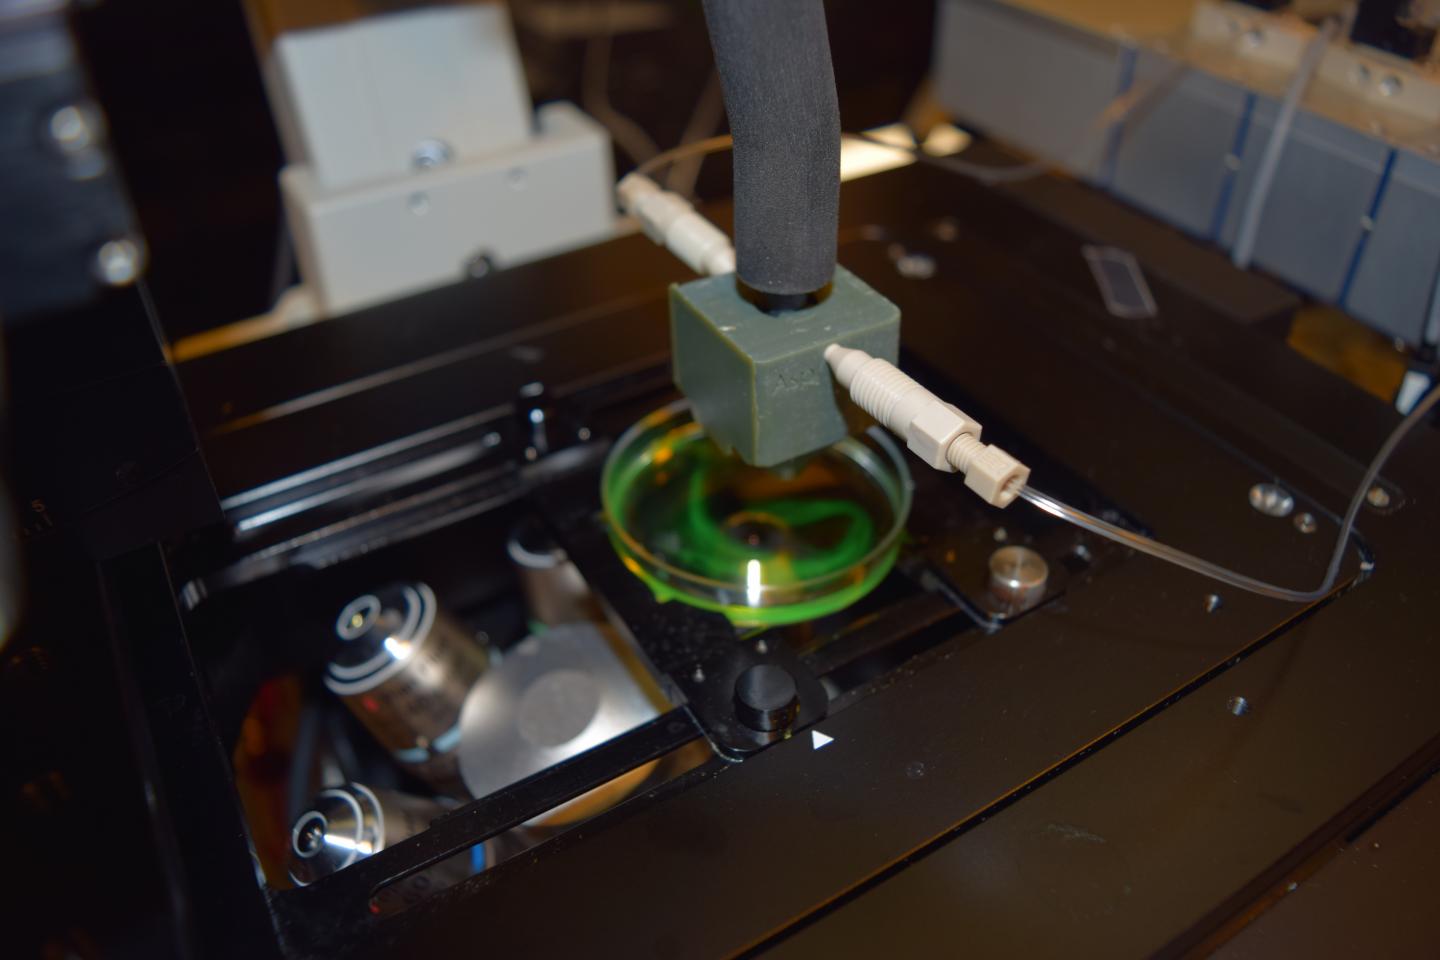 3D Printing Provides Way to Fabricate Probes Used in Cancer Research